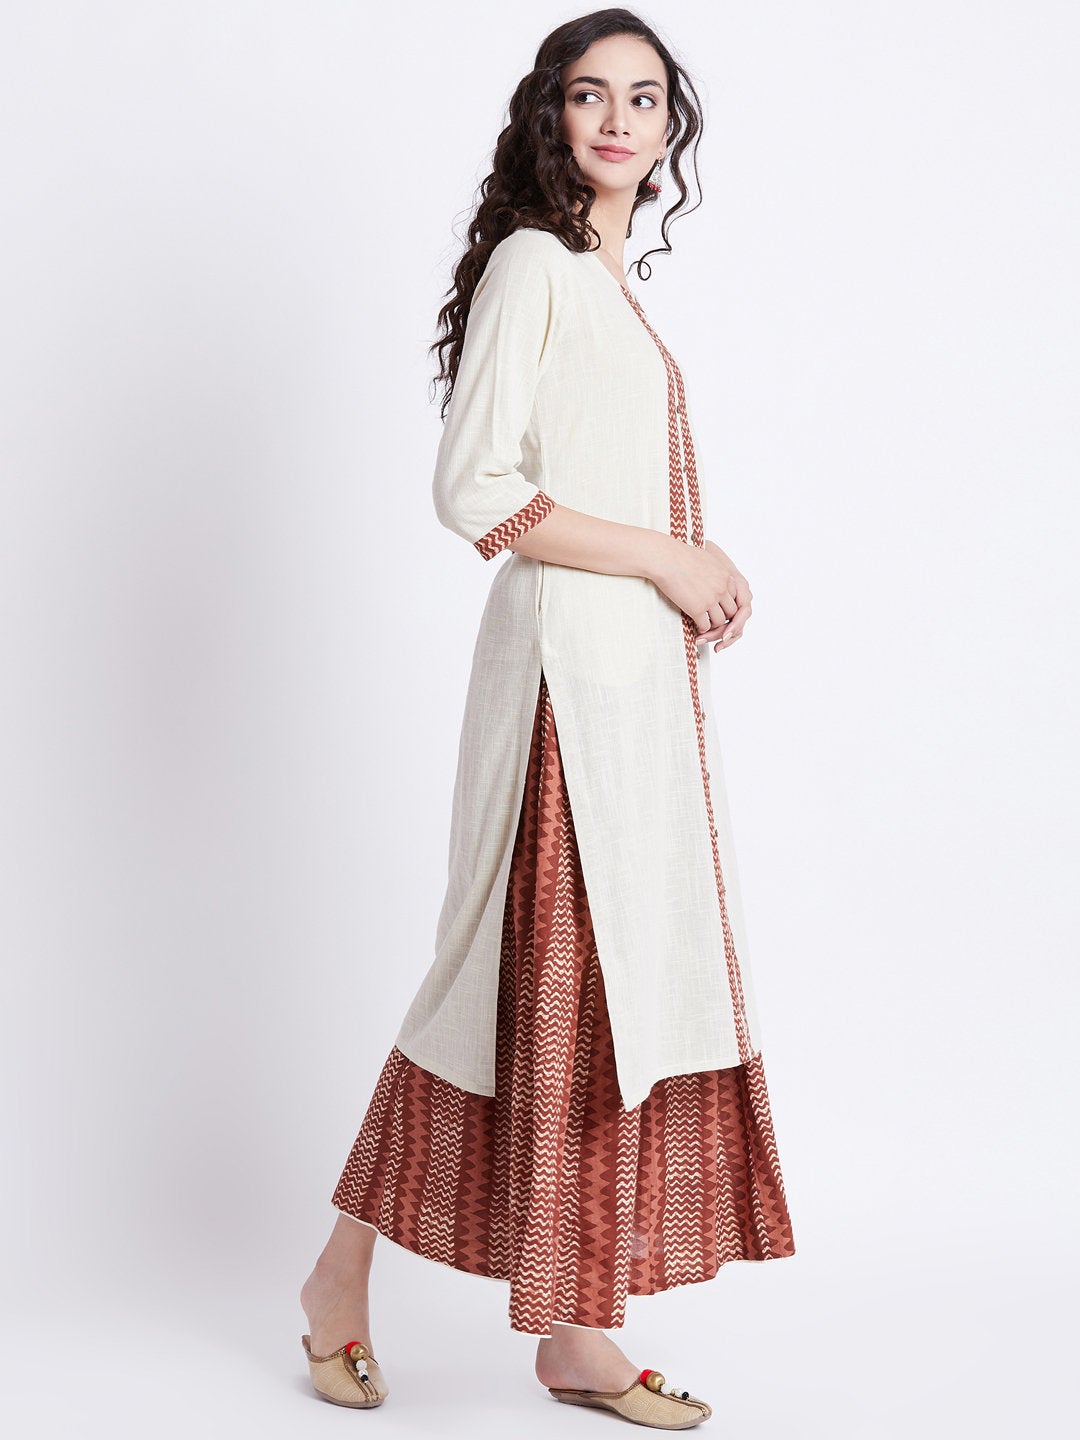 Hand block printed skirt with off-white long cotton kurta with print detailing on front & sleeves